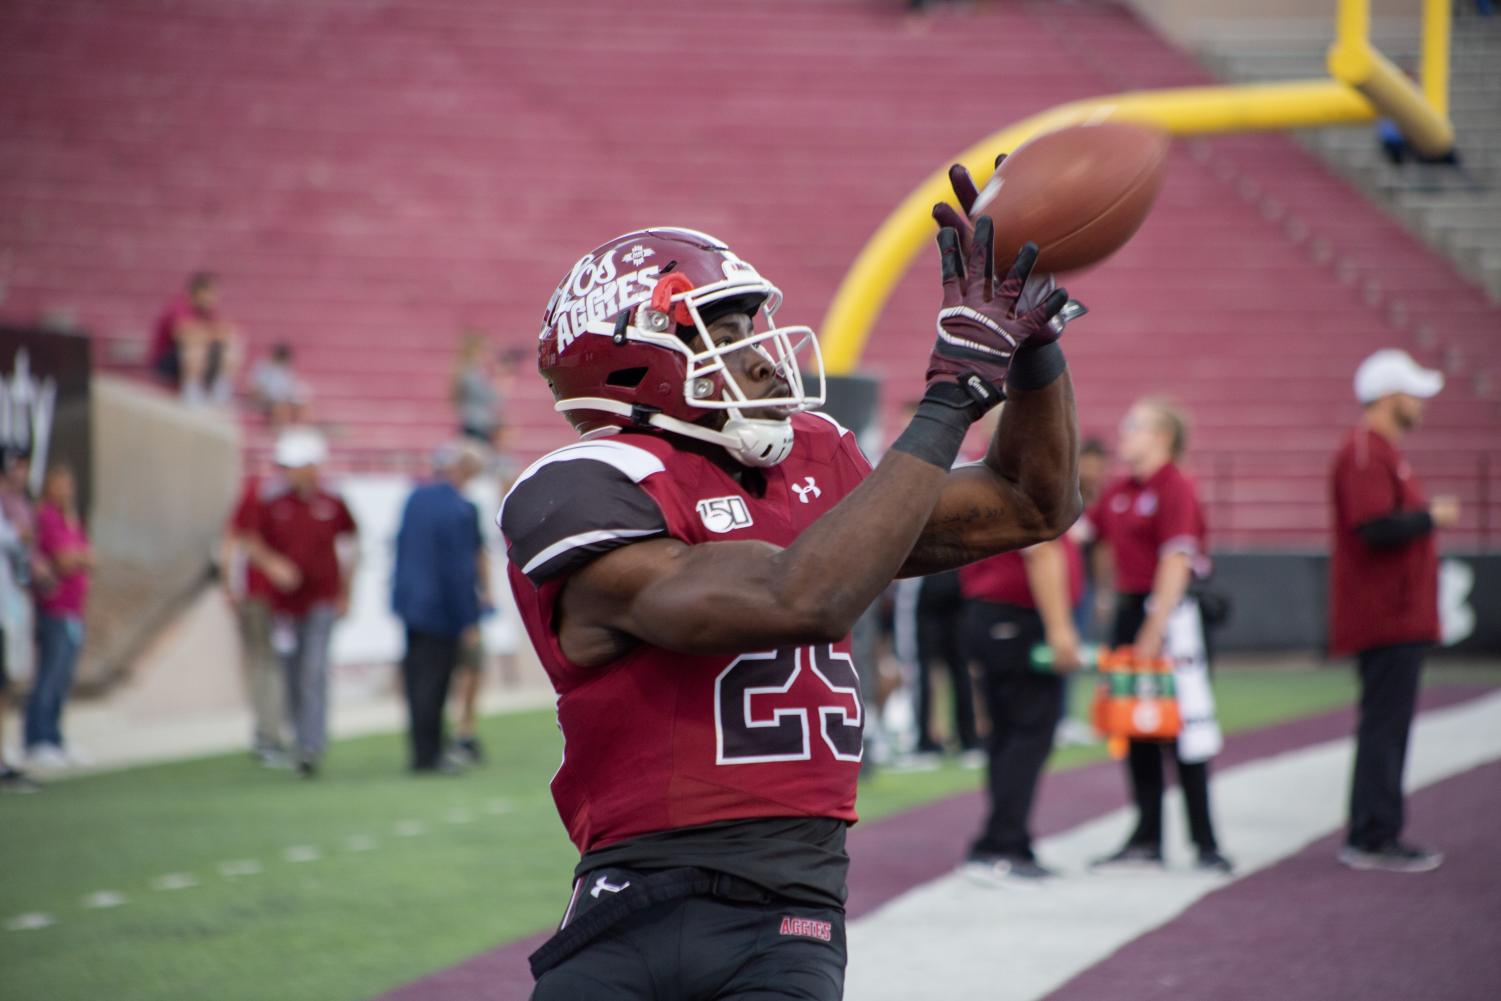 Tough schedule rages on as New Mexico State football hosts Fresno State - NMSU Round Up